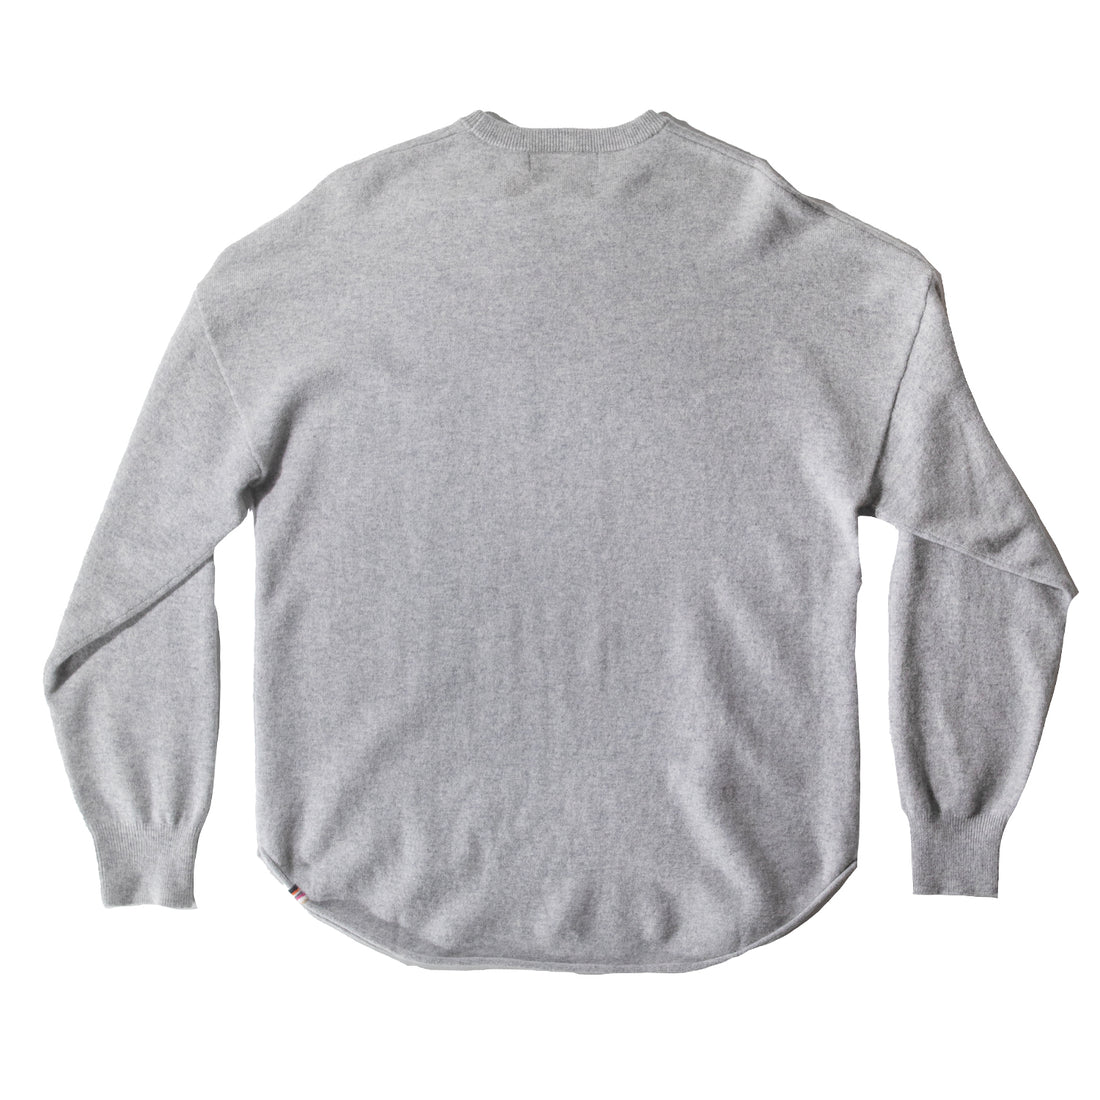 Extreme Cashmere Crew Hop Sweater in Grey